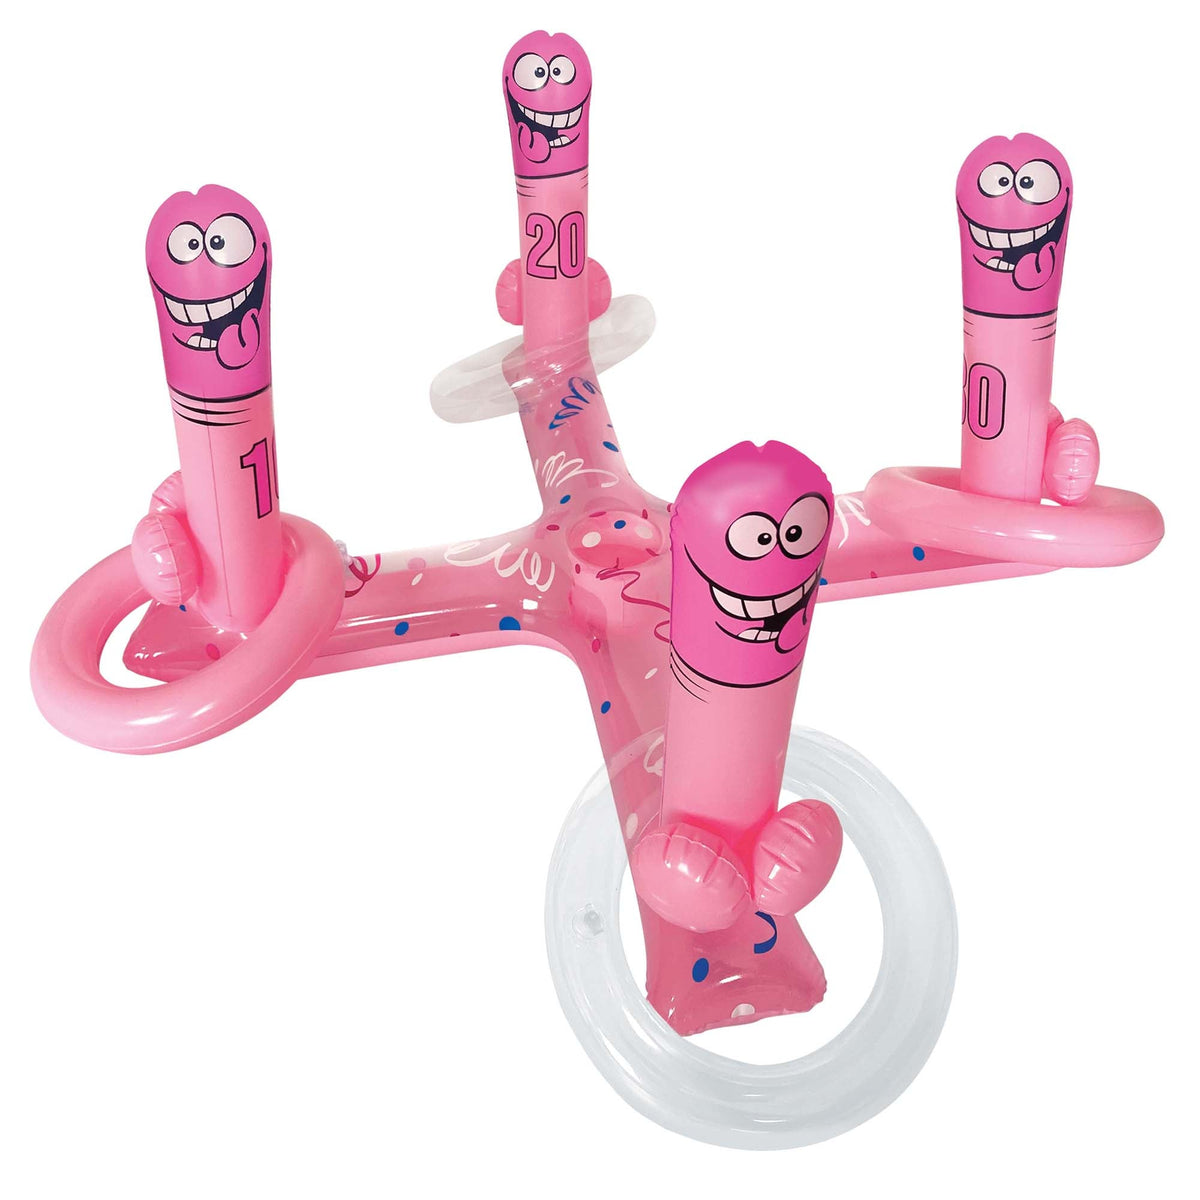 OZZE Bachelorette Inflatable Penis Game, 1 Count 623849033154